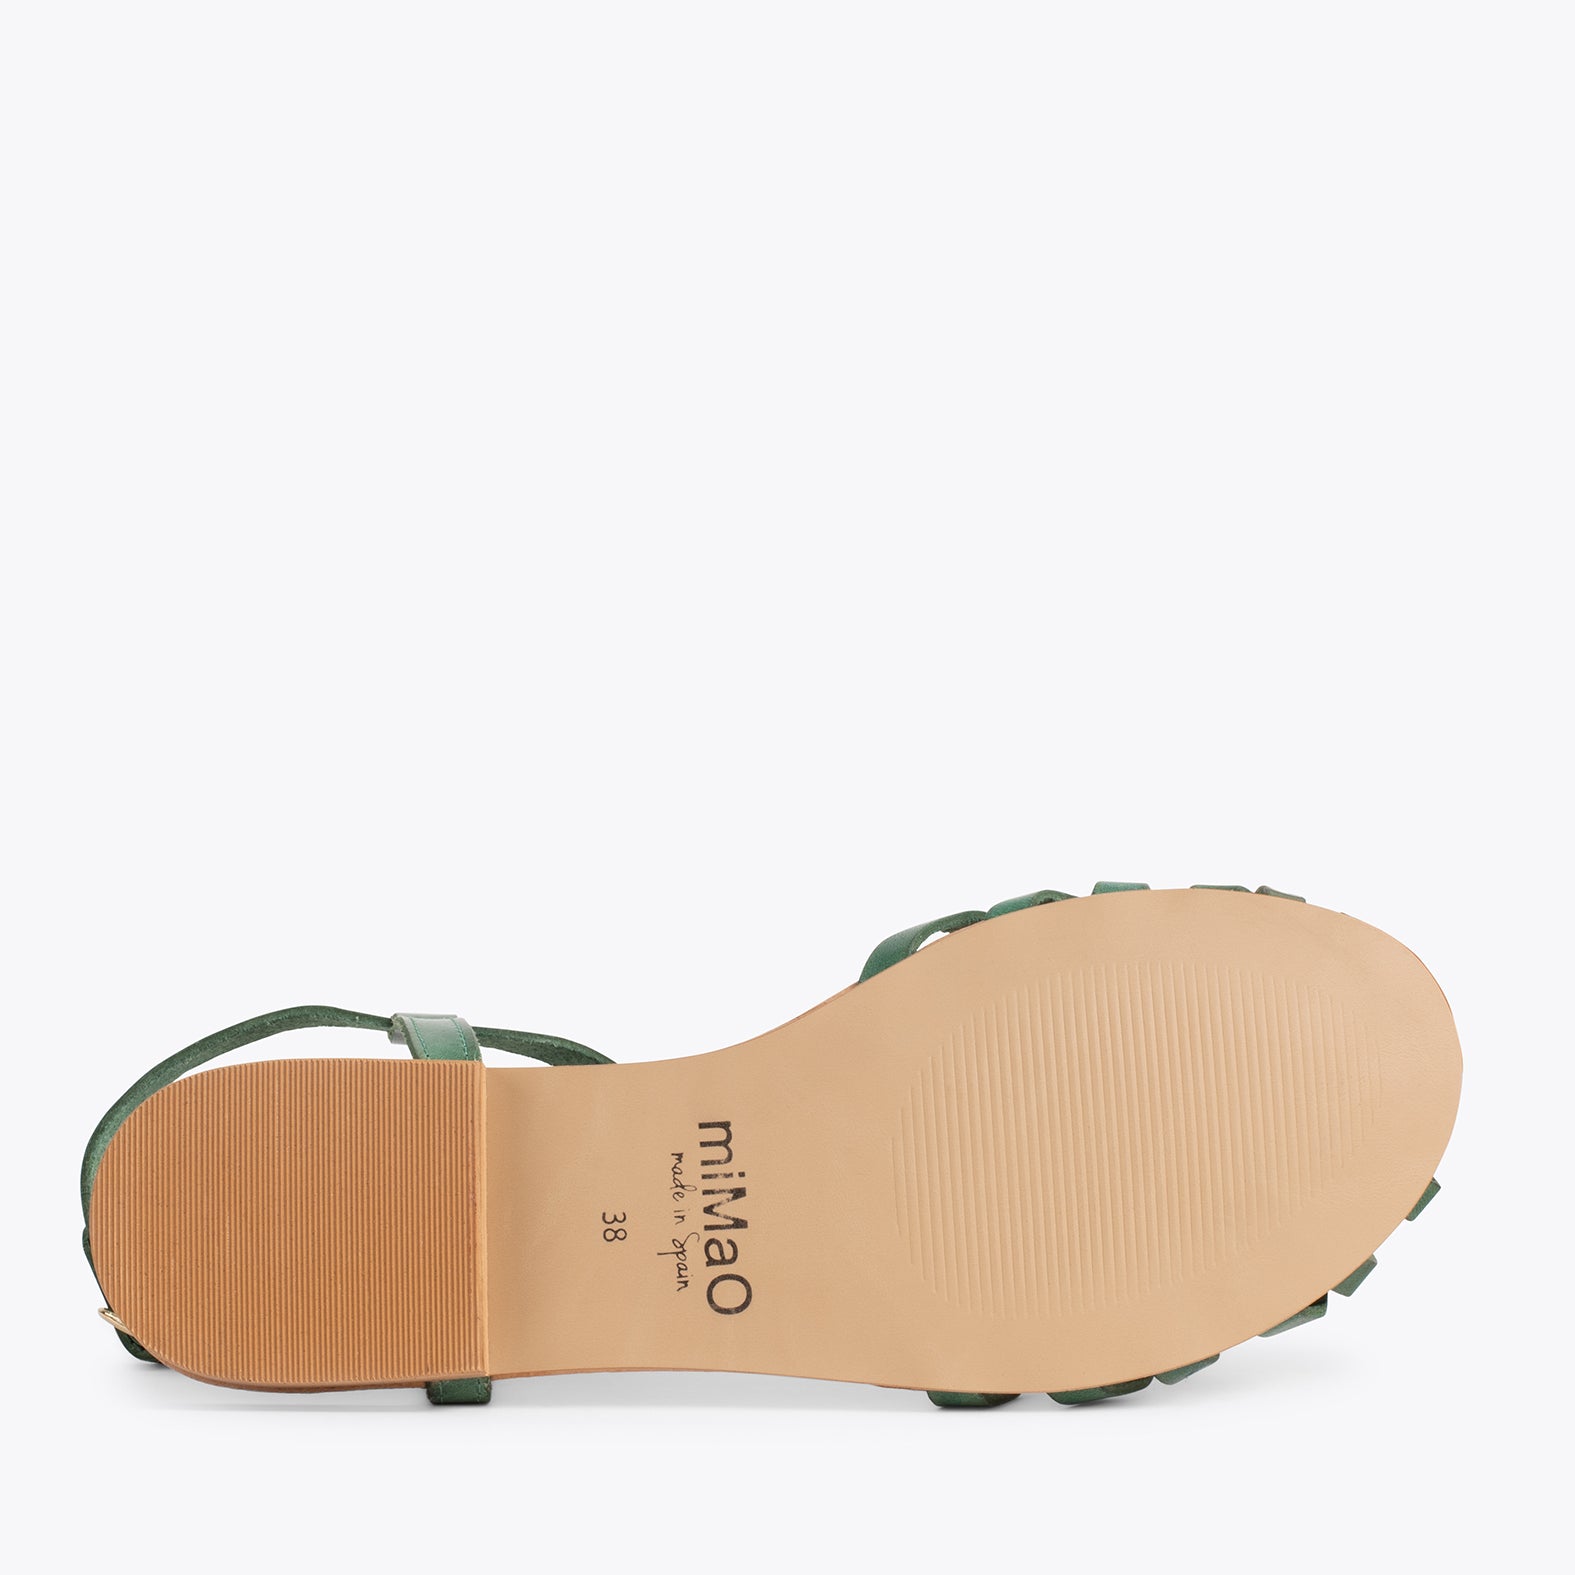 BEACH - GREEN sandal with straps